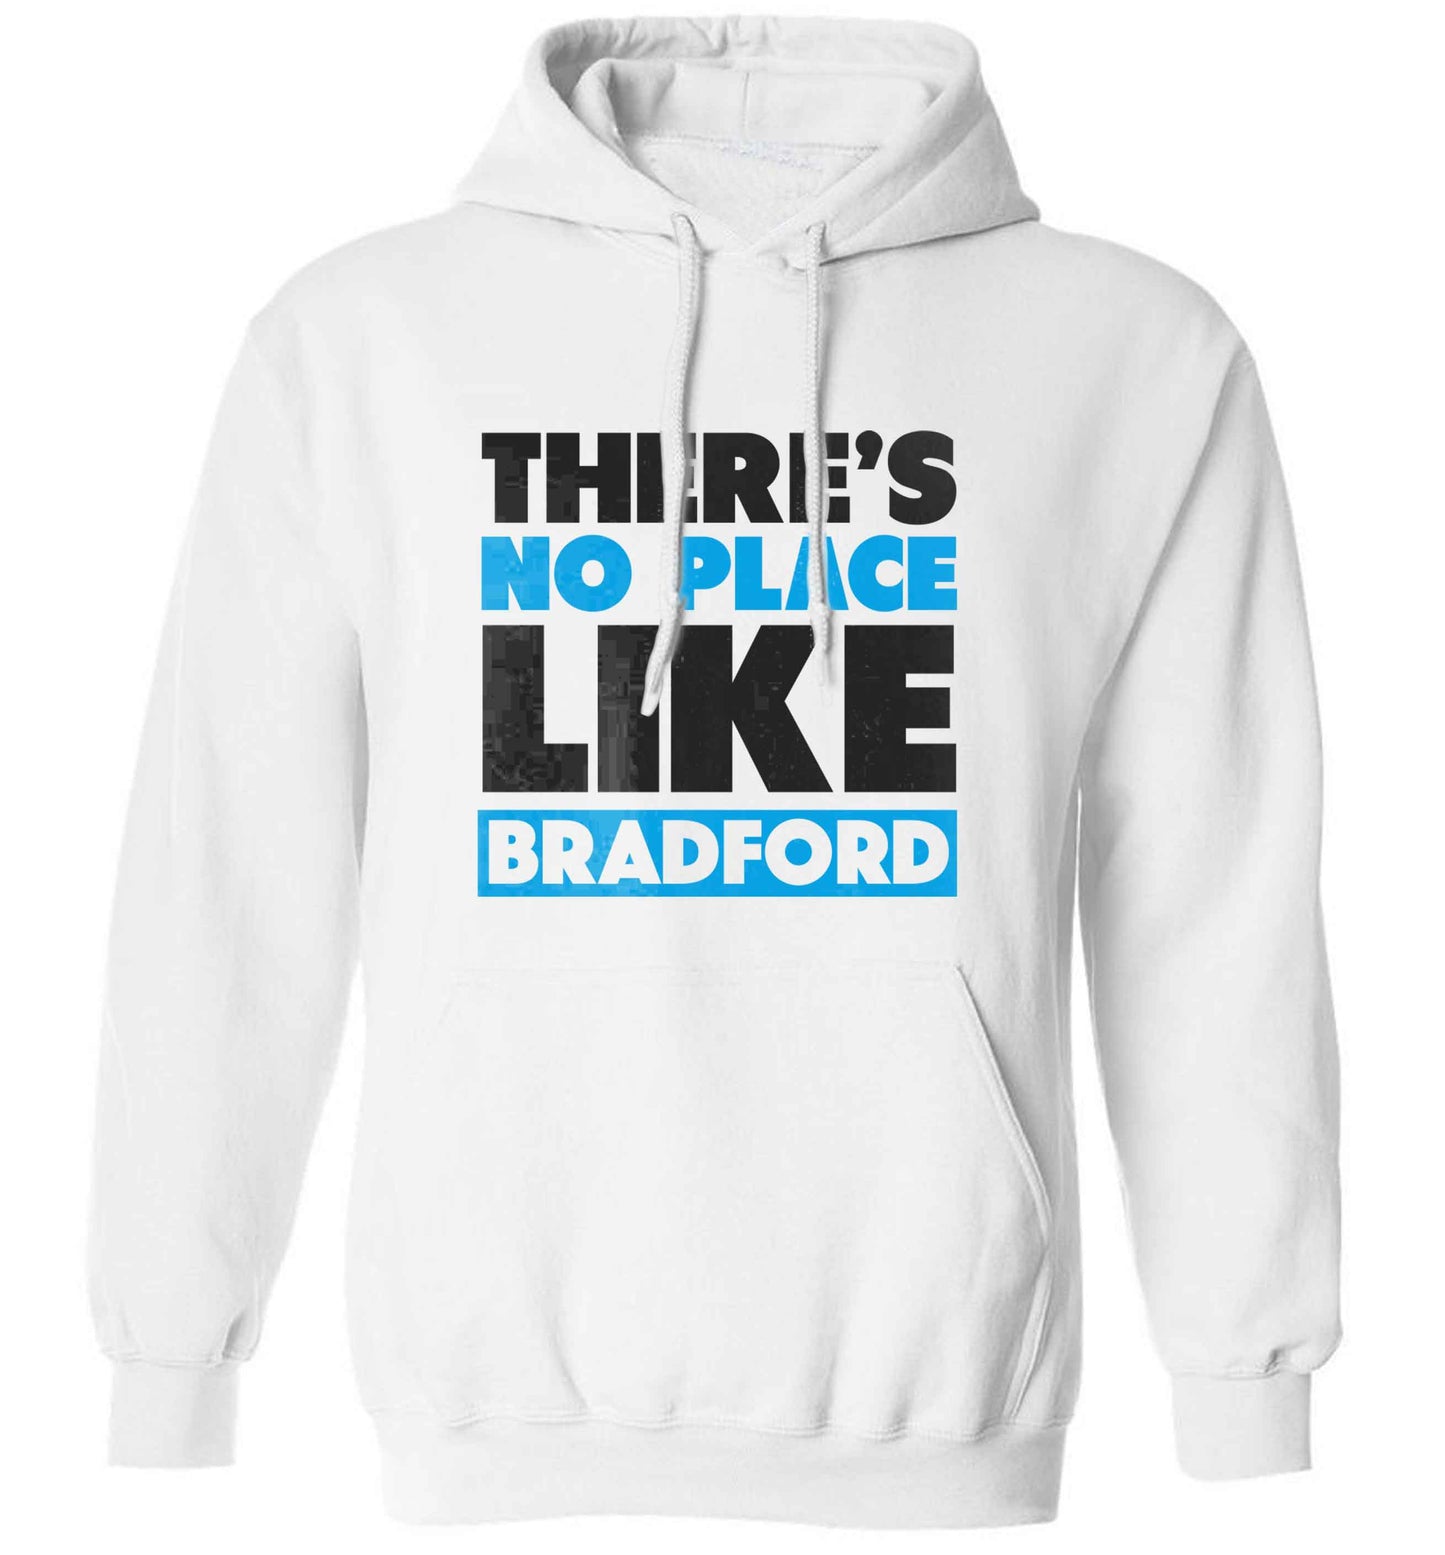 There's no place like Bradford adults unisex white hoodie 2XL